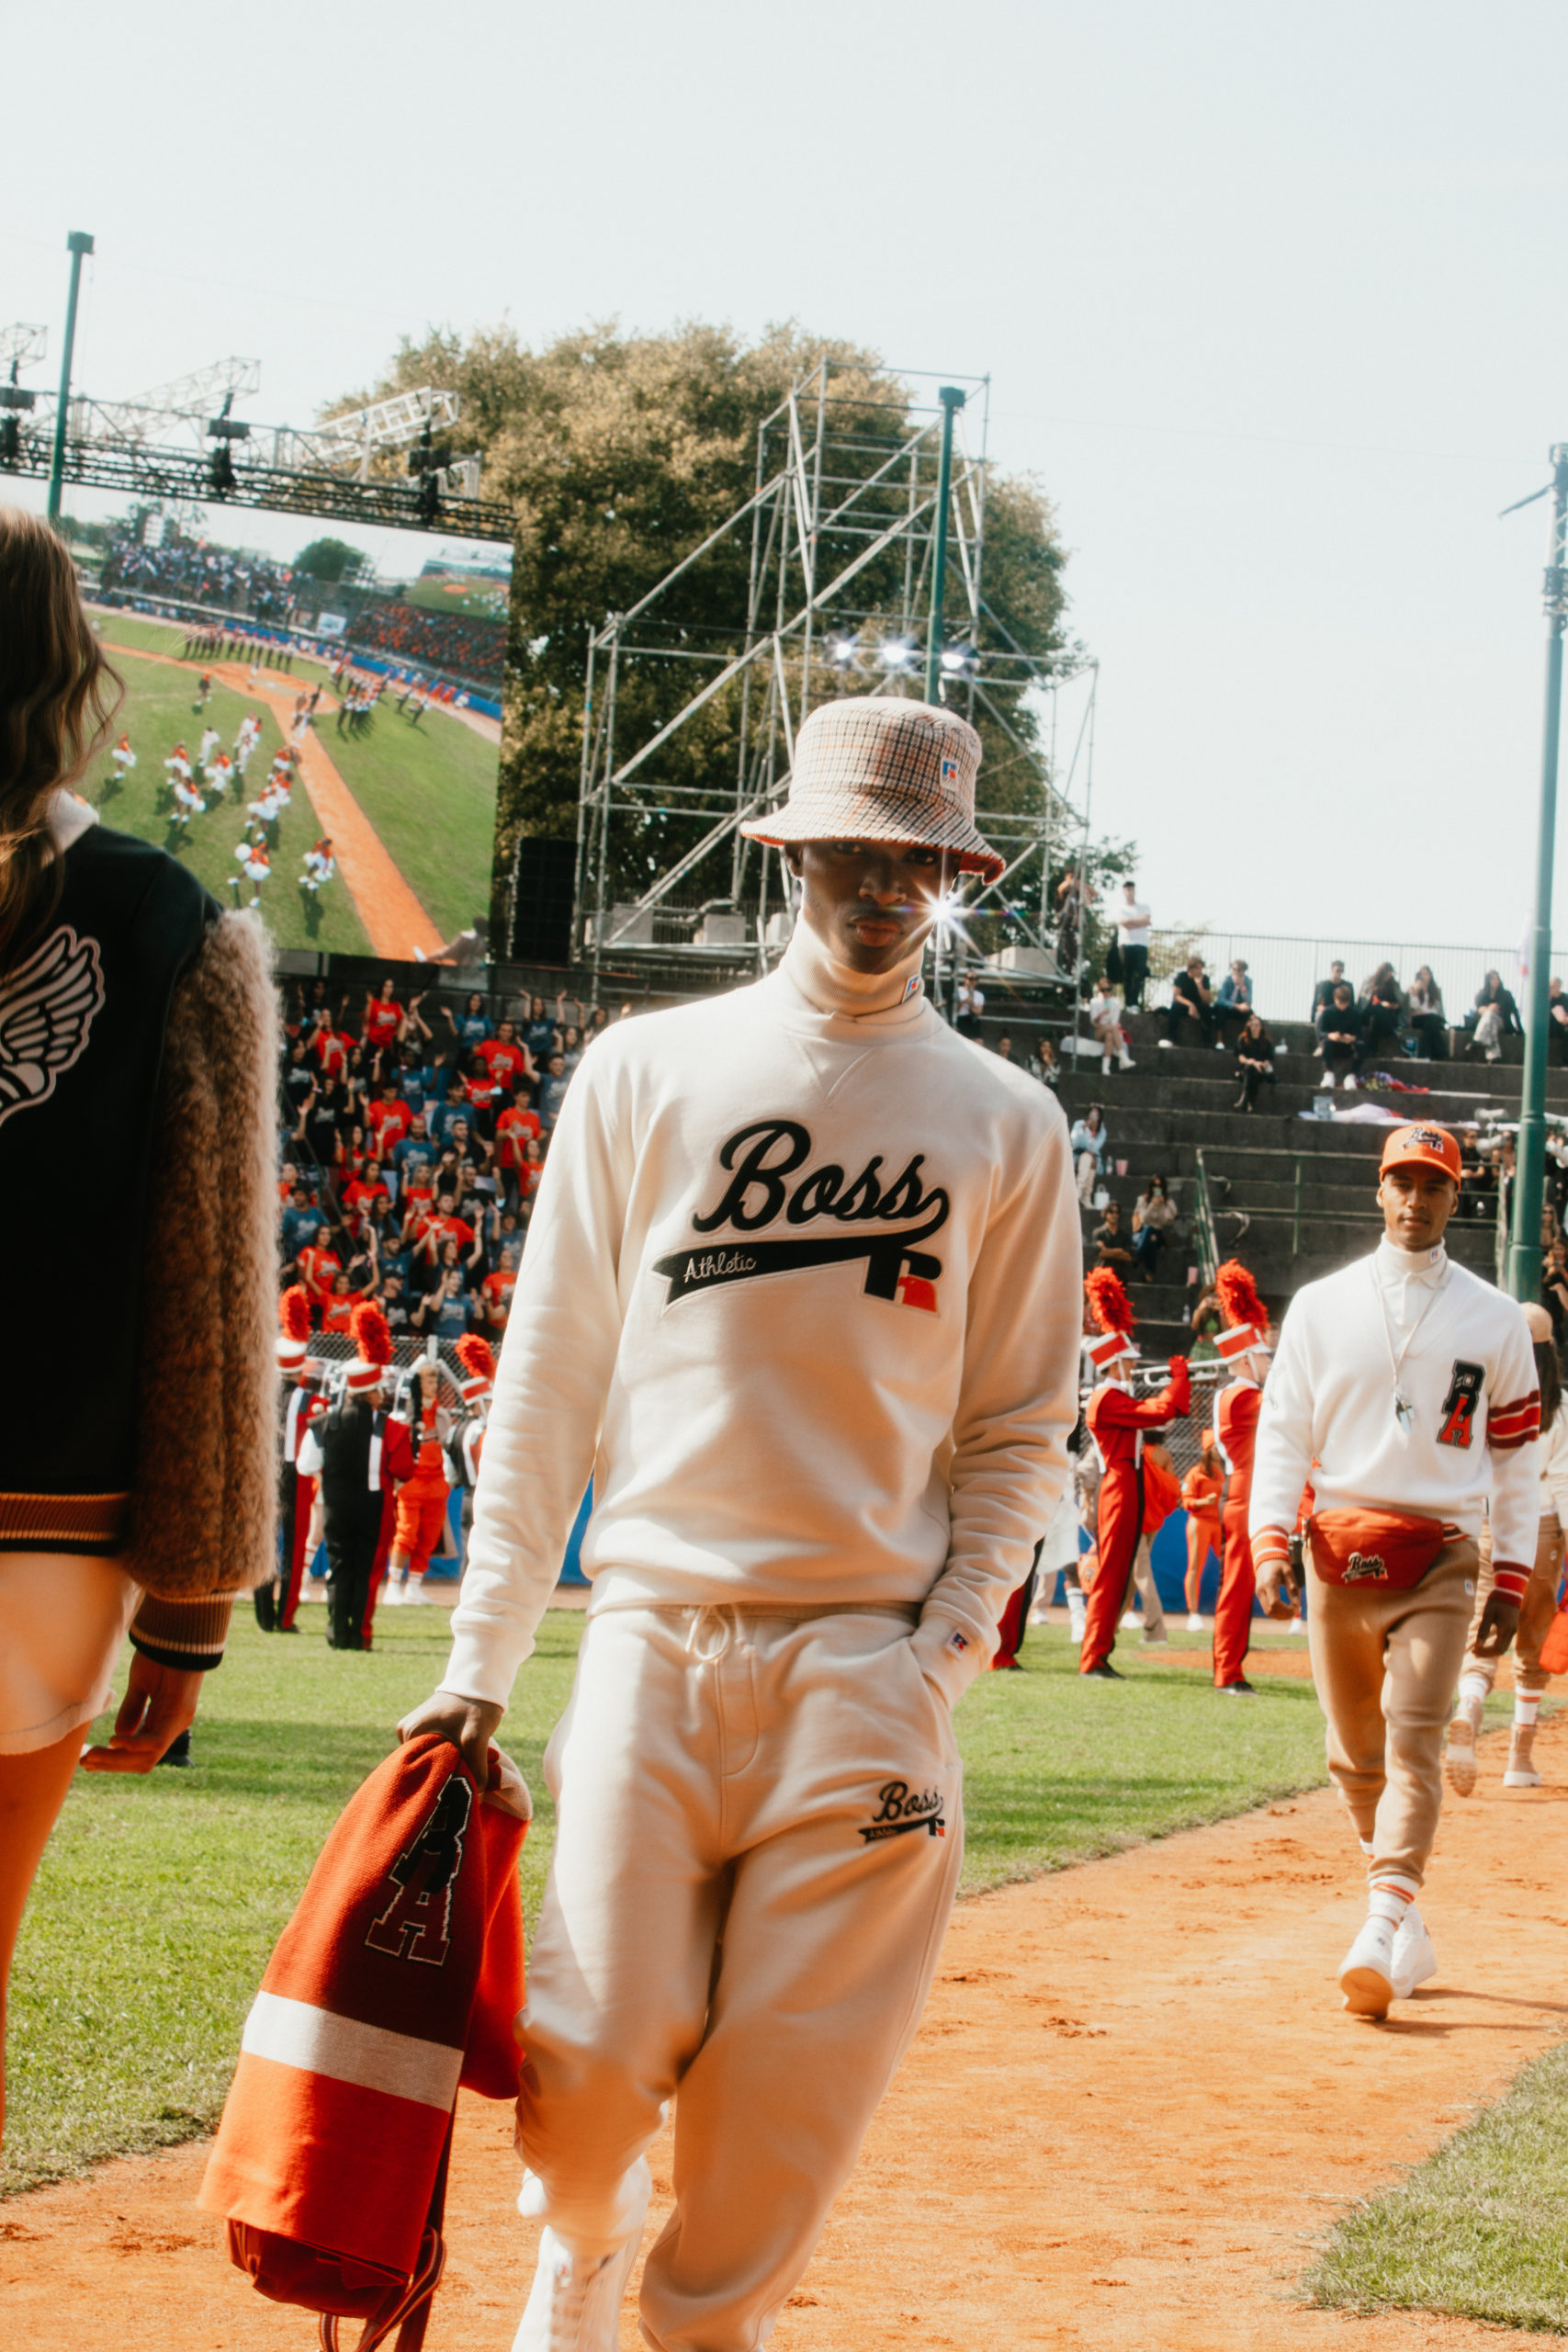 The BOSS x Russell Athletic fashion show on a Milan baseball pitch